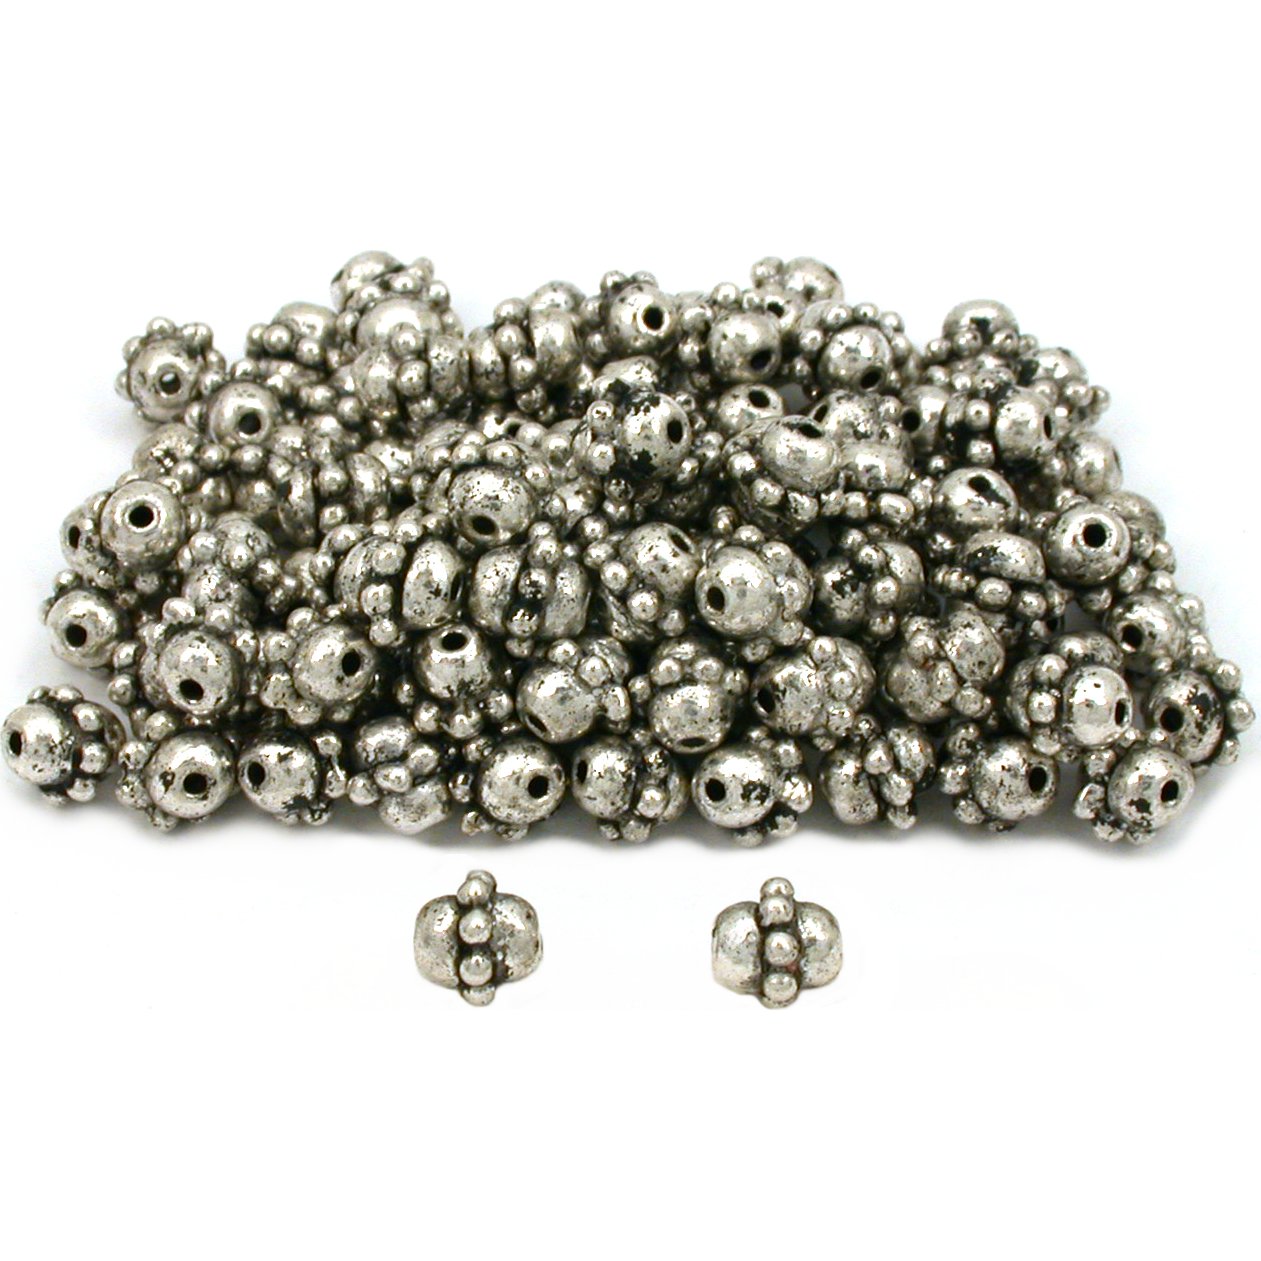 Barrel Bali Beads Antique Silver Plated 7mm Approx 100